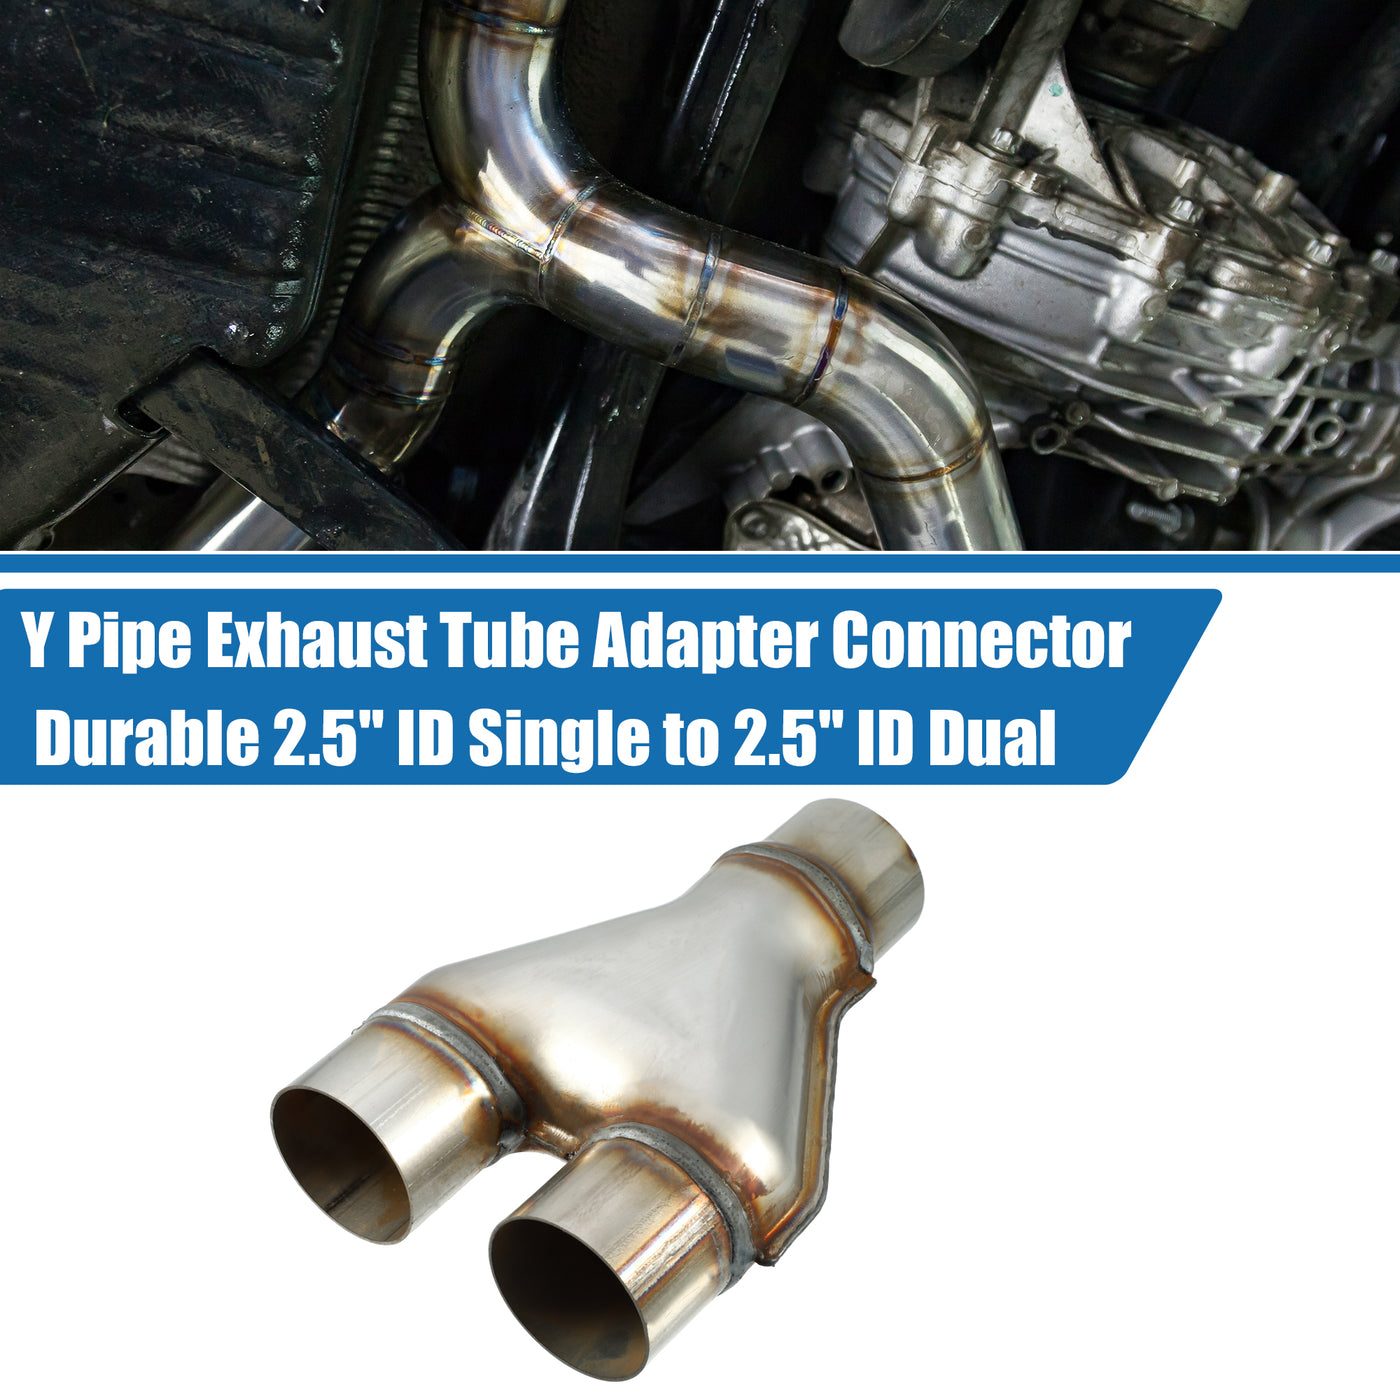 A ABSOPRO Y Pipe Exhaust Tube Adapter Connector Durable 2.5" ID Single to 2.5" ID Dual Exhaust Adapter Connector 10 Inch Overall Length T409 Stainless Steel Silver Tone